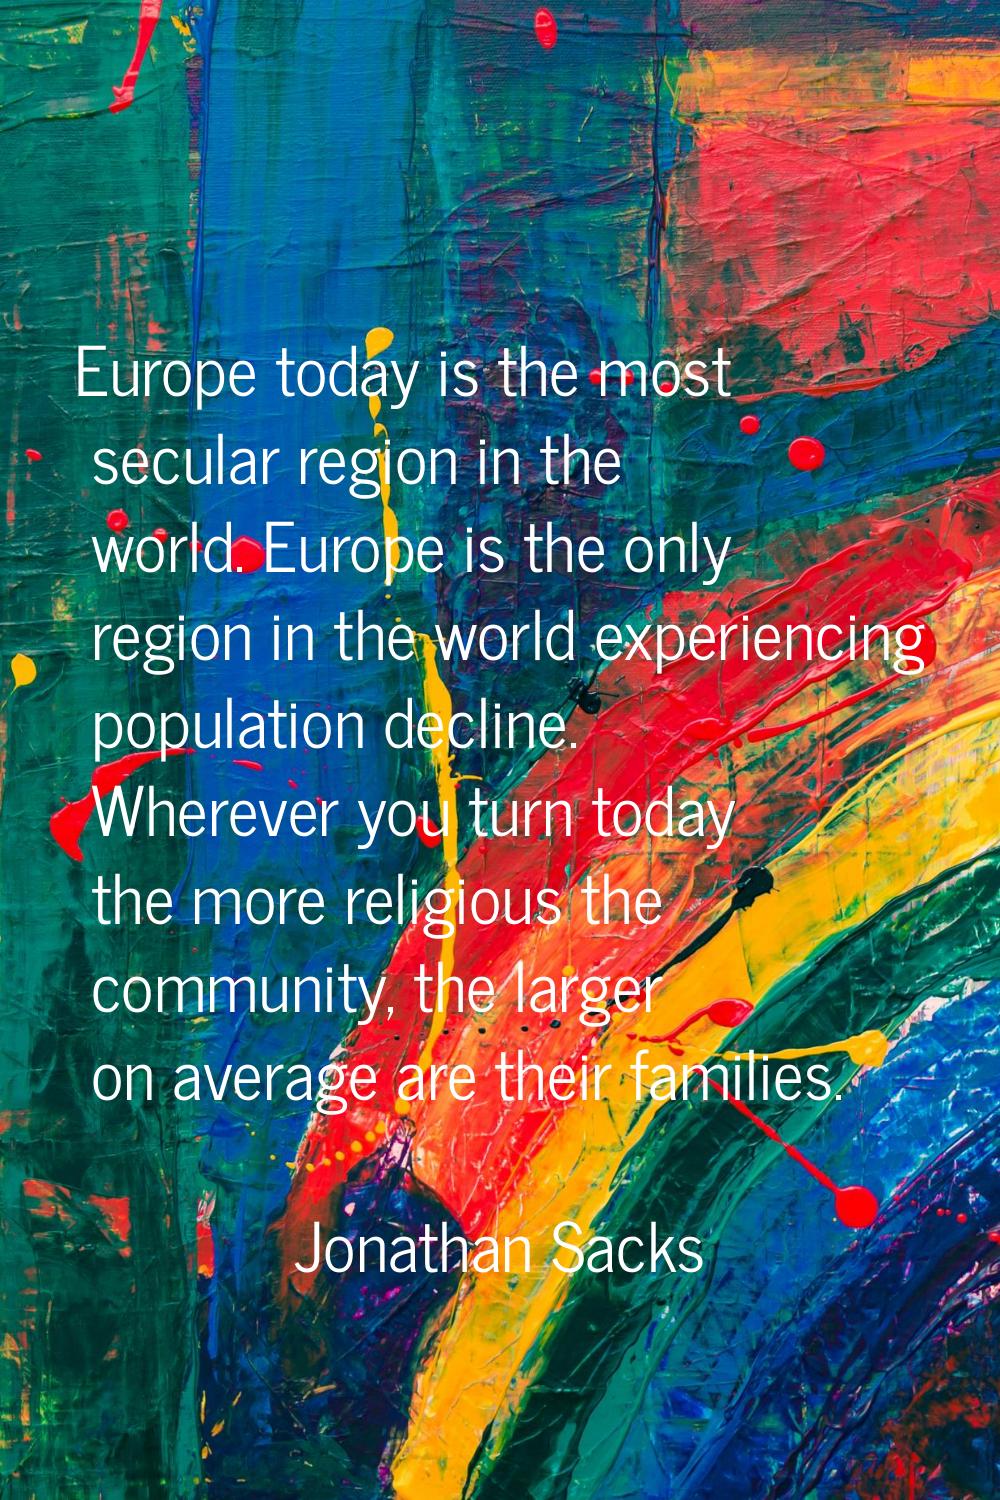 Europe today is the most secular region in the world. Europe is the only region in the world experi